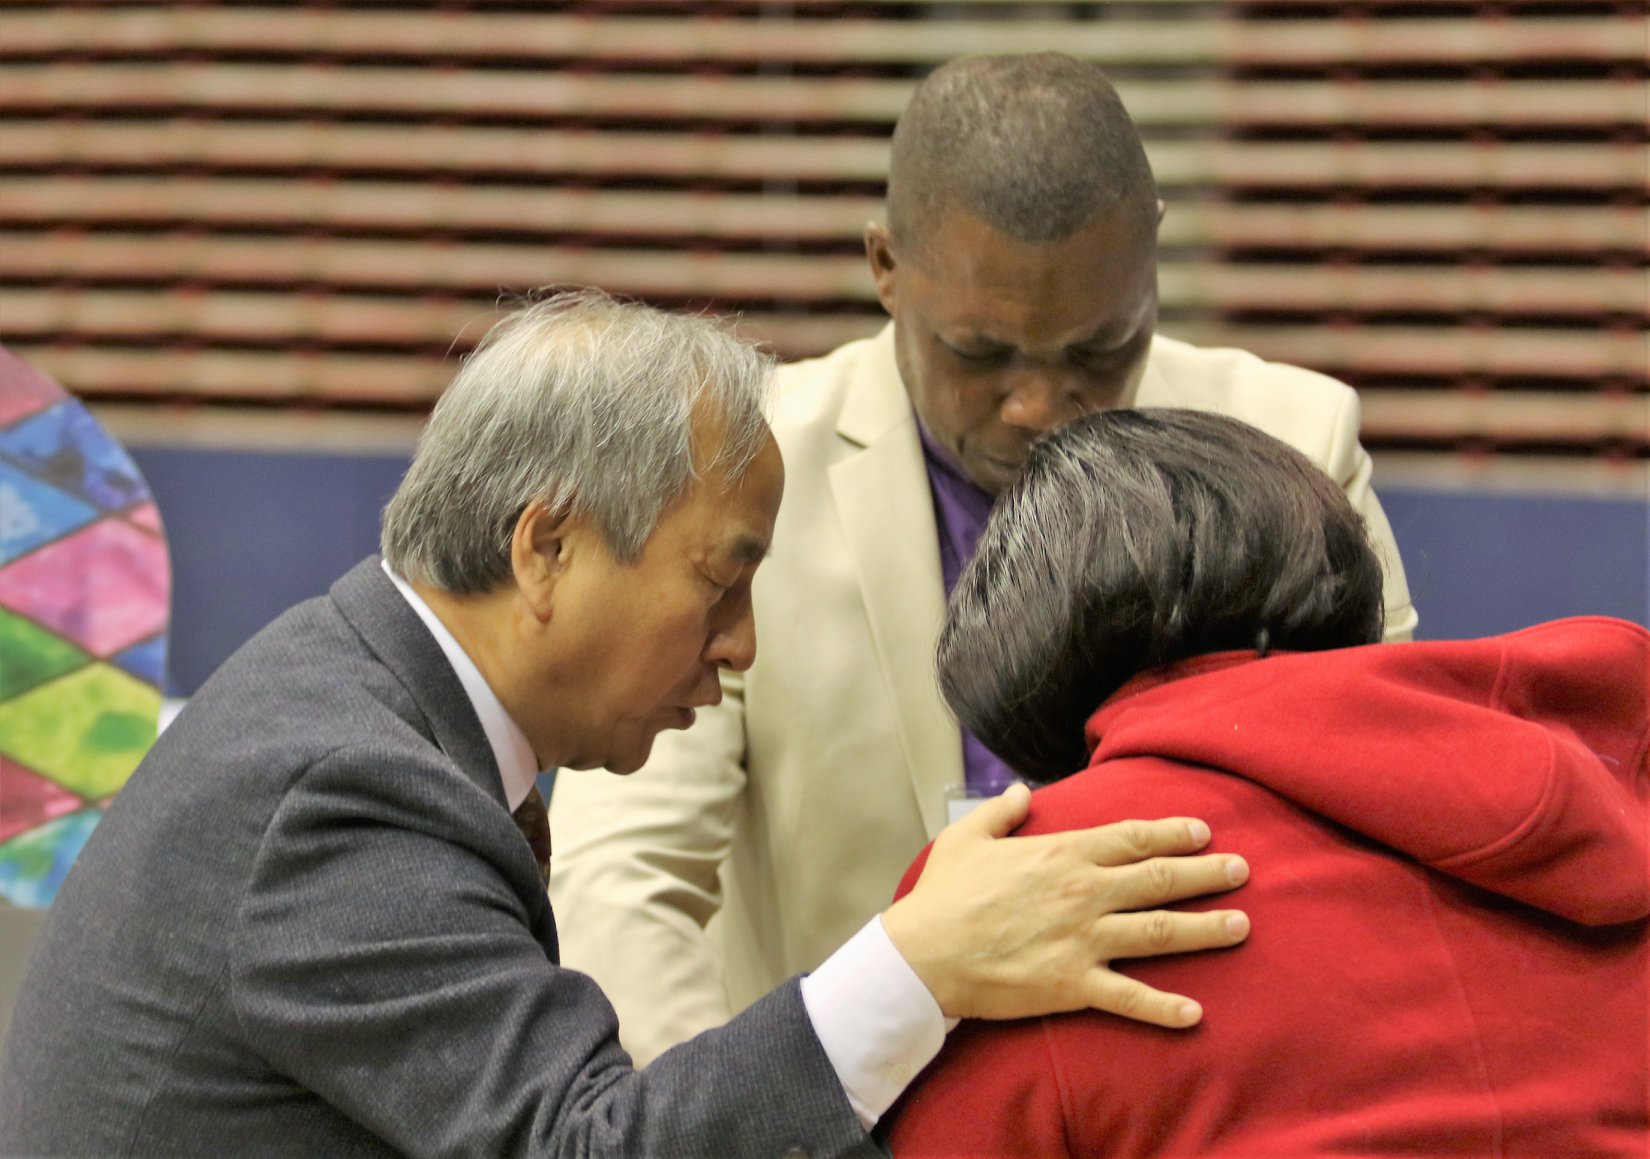 Bishop Hee-Soo Jung, left, prays with delegates during a Day of Prayer on the first day of General Conference 2019 in St. Louis. Photo by the Rev. Thomas Kim, UMNS.